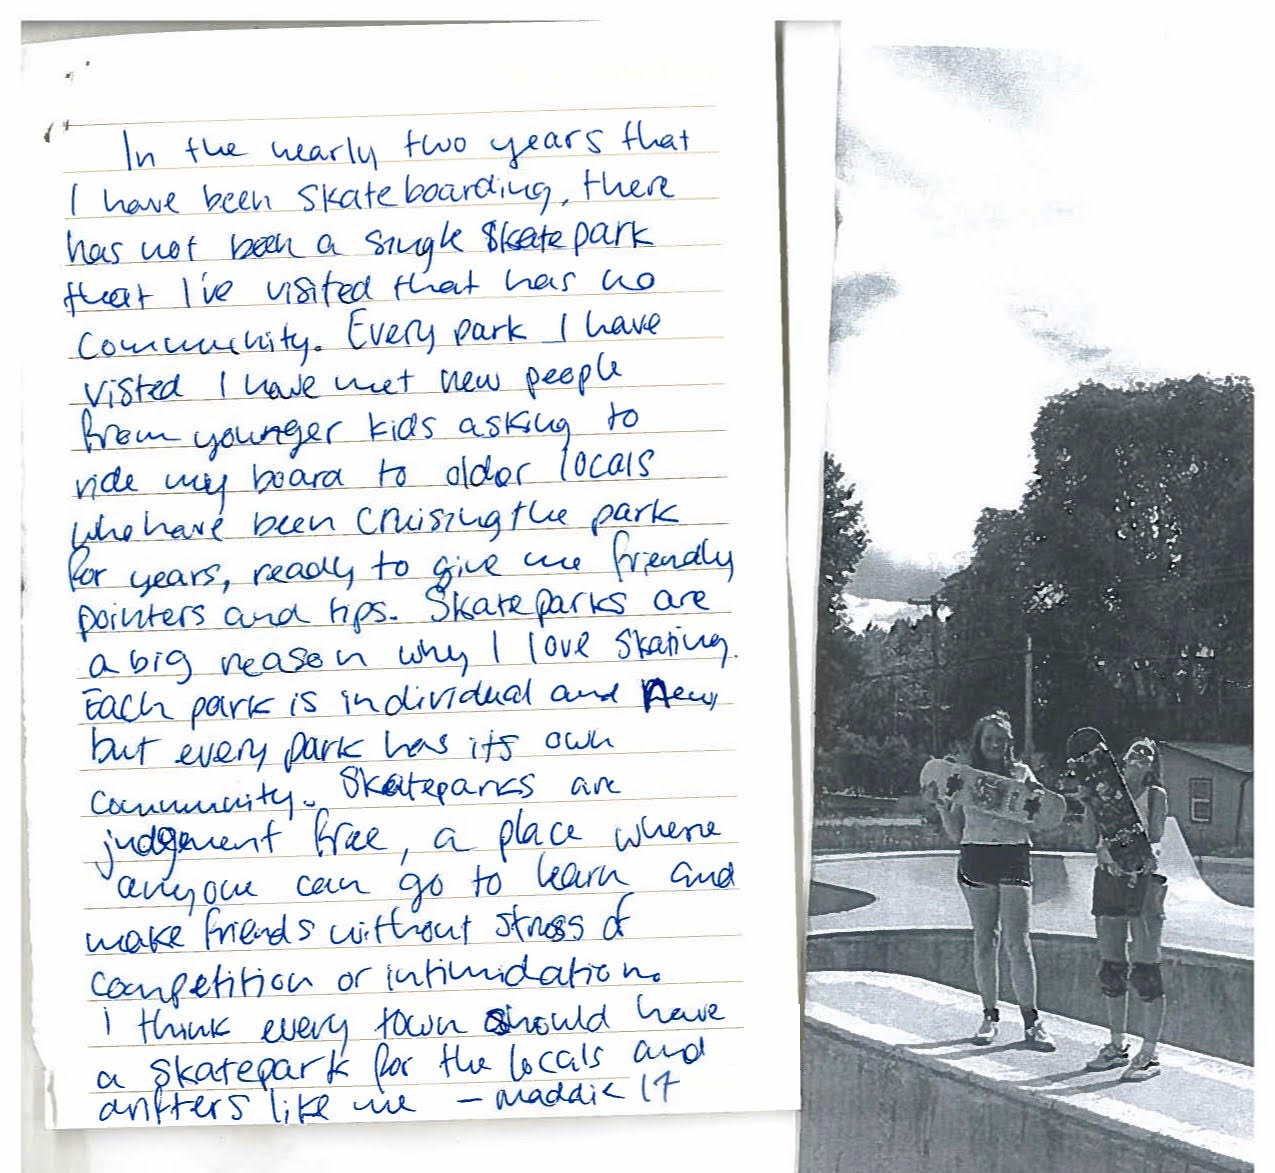 Written letter of support from a teen with description of why skating is important to the author, and a photo of two teenage girls holding skateboards at a skate park.